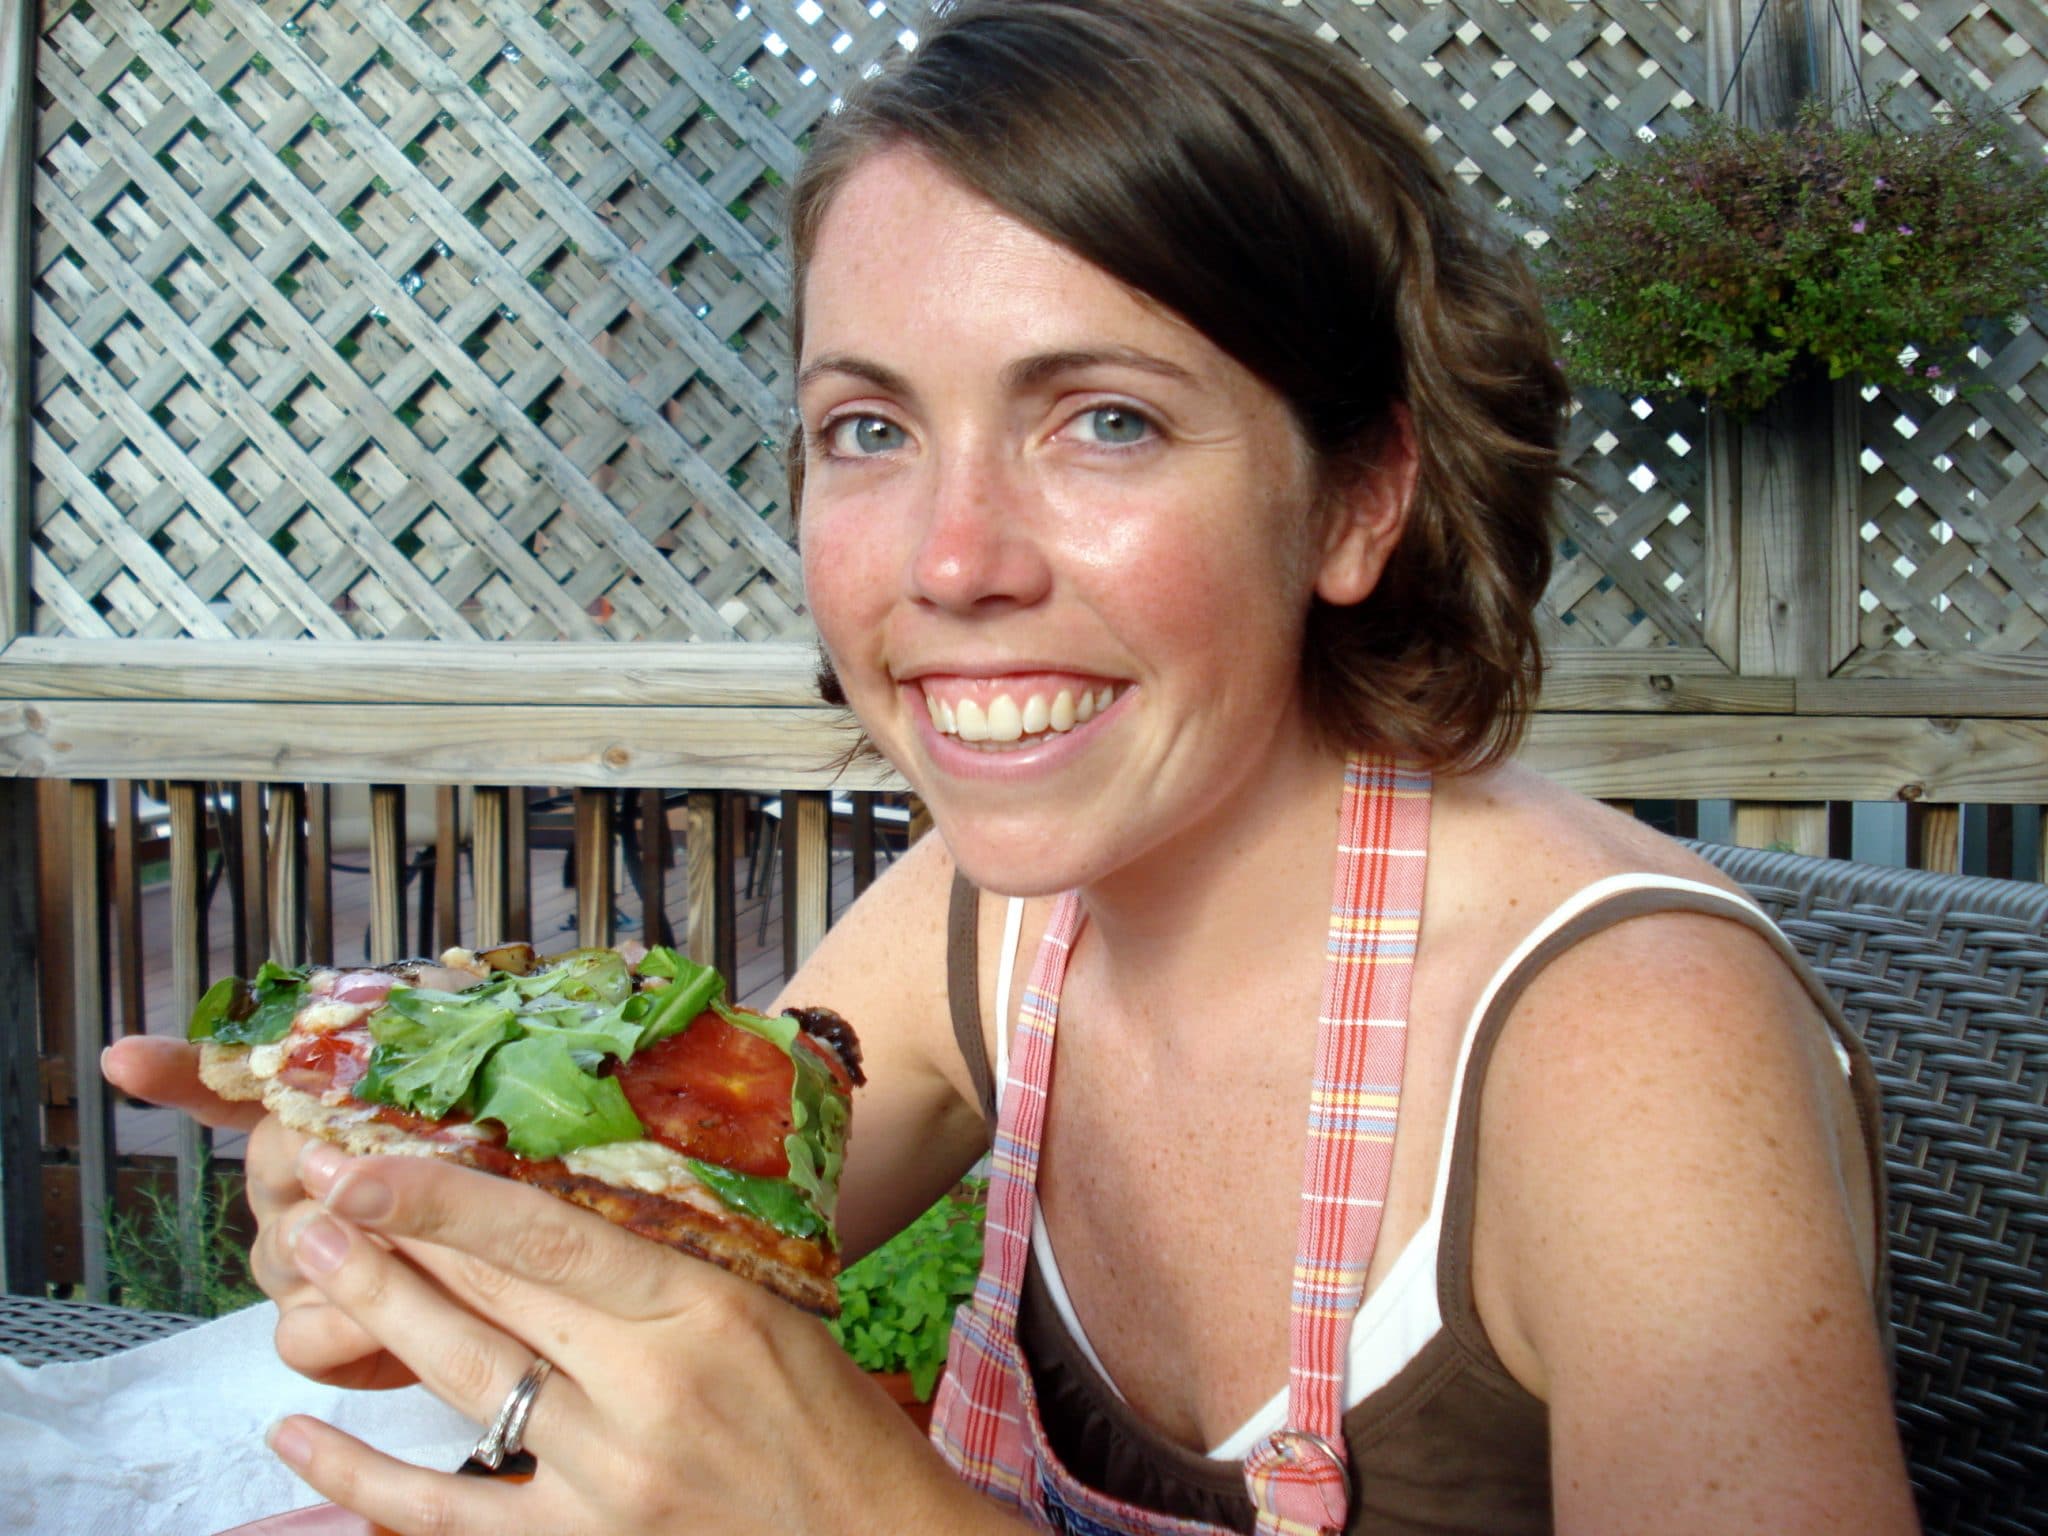 Woman enjoying slice of grilled pizza